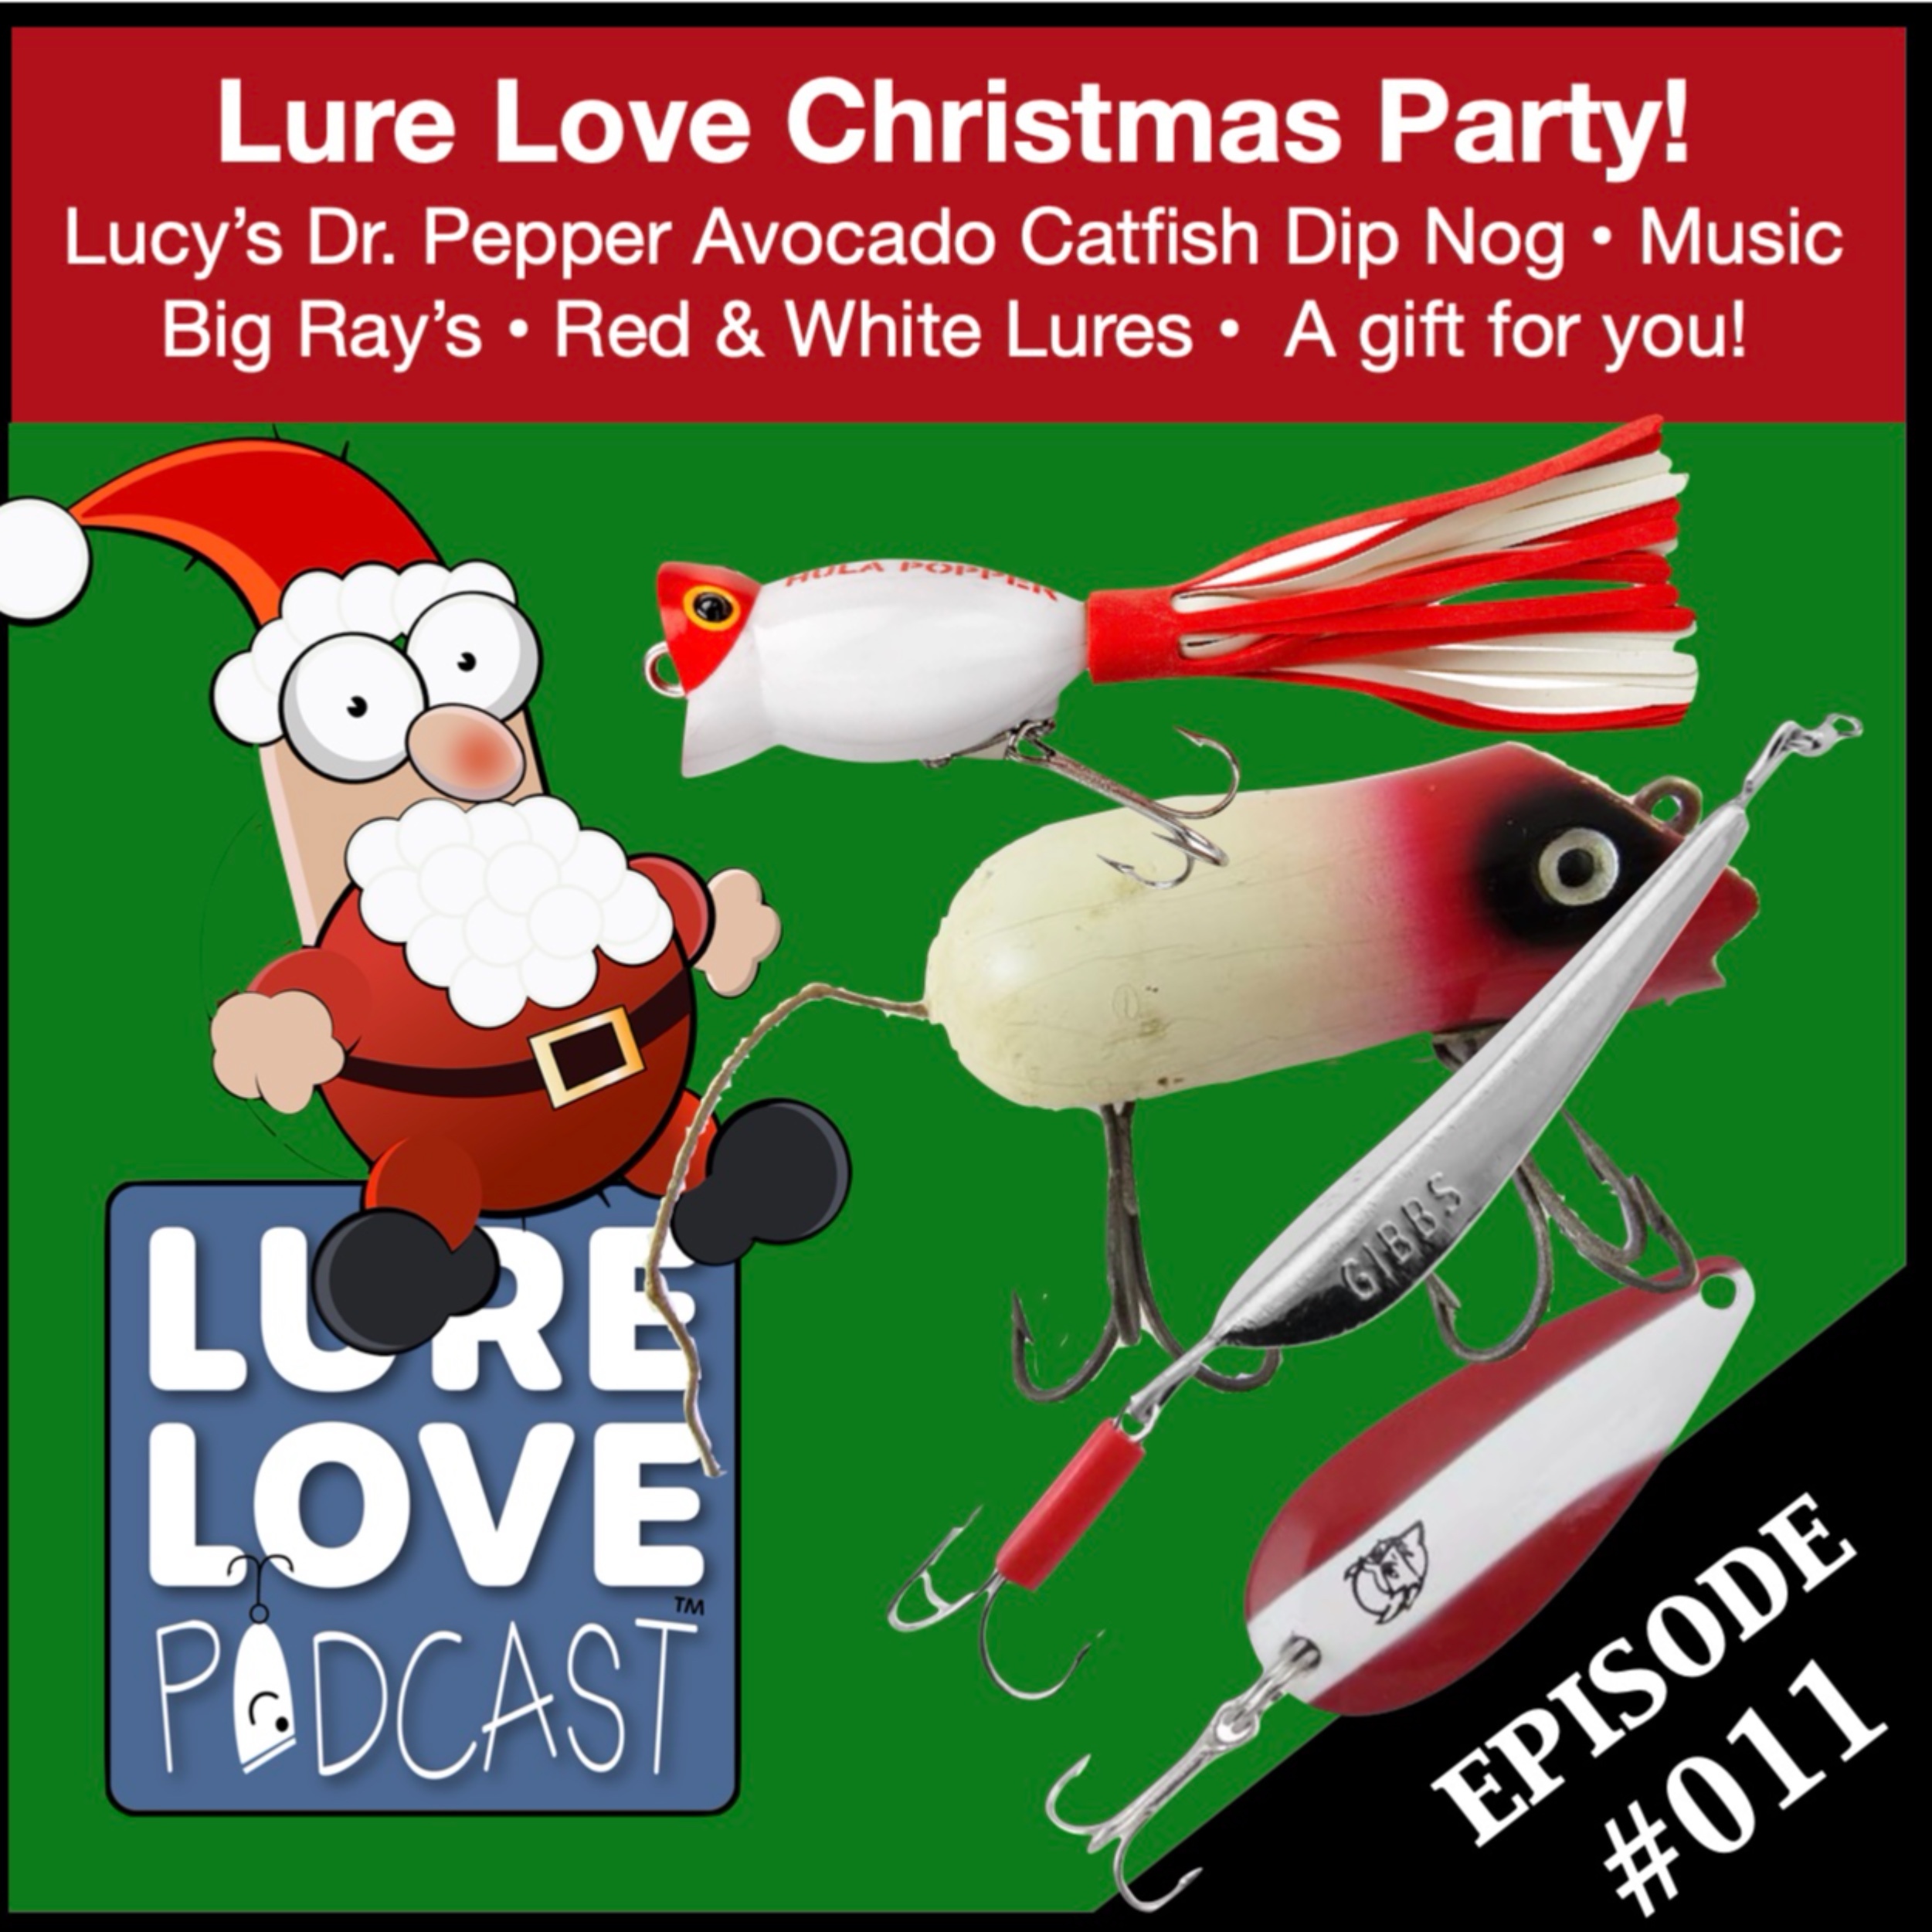 Lure Love Christmas party! Image